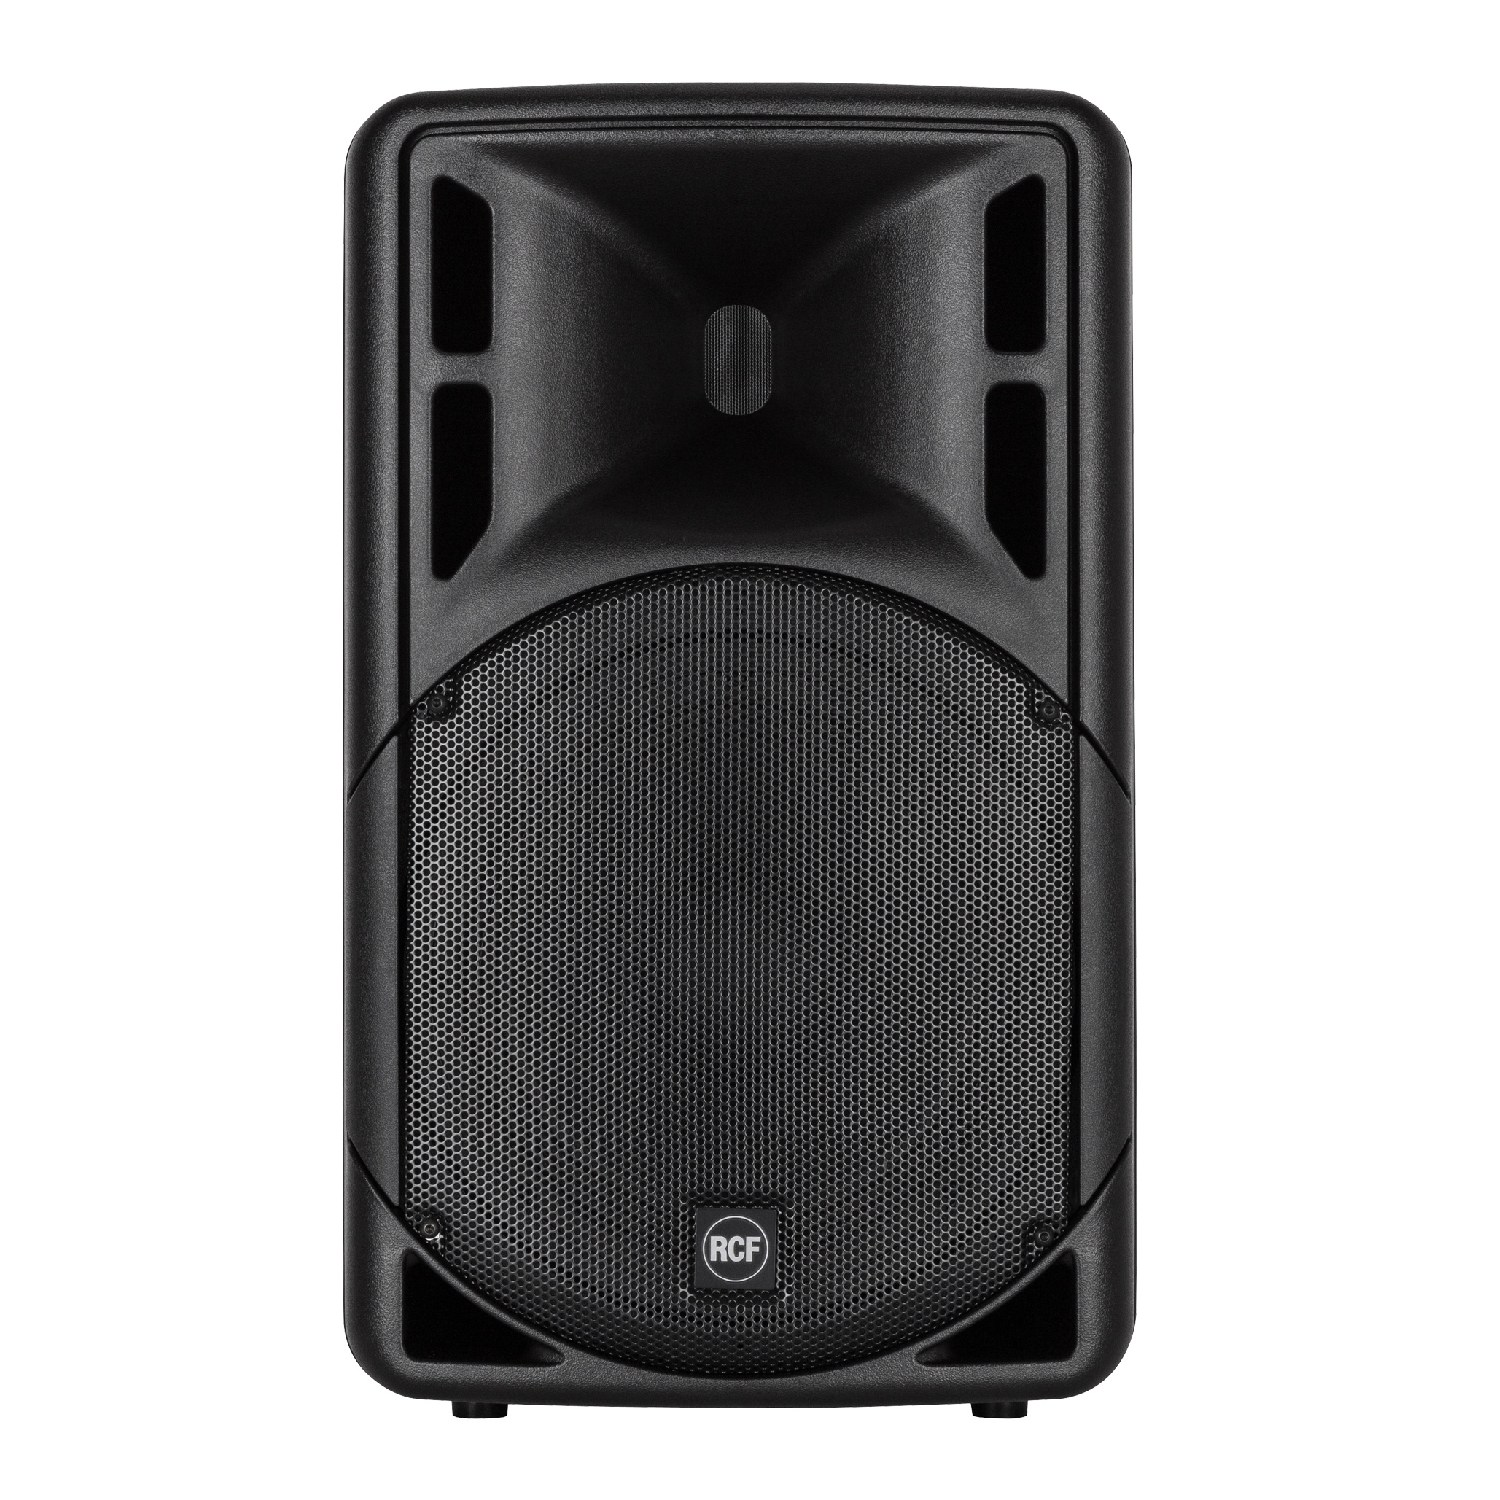 15 Inches Woofer Active Two Way Speaker 800Watts DSP Processing with Firphase   ART 315 A MK4 rcf